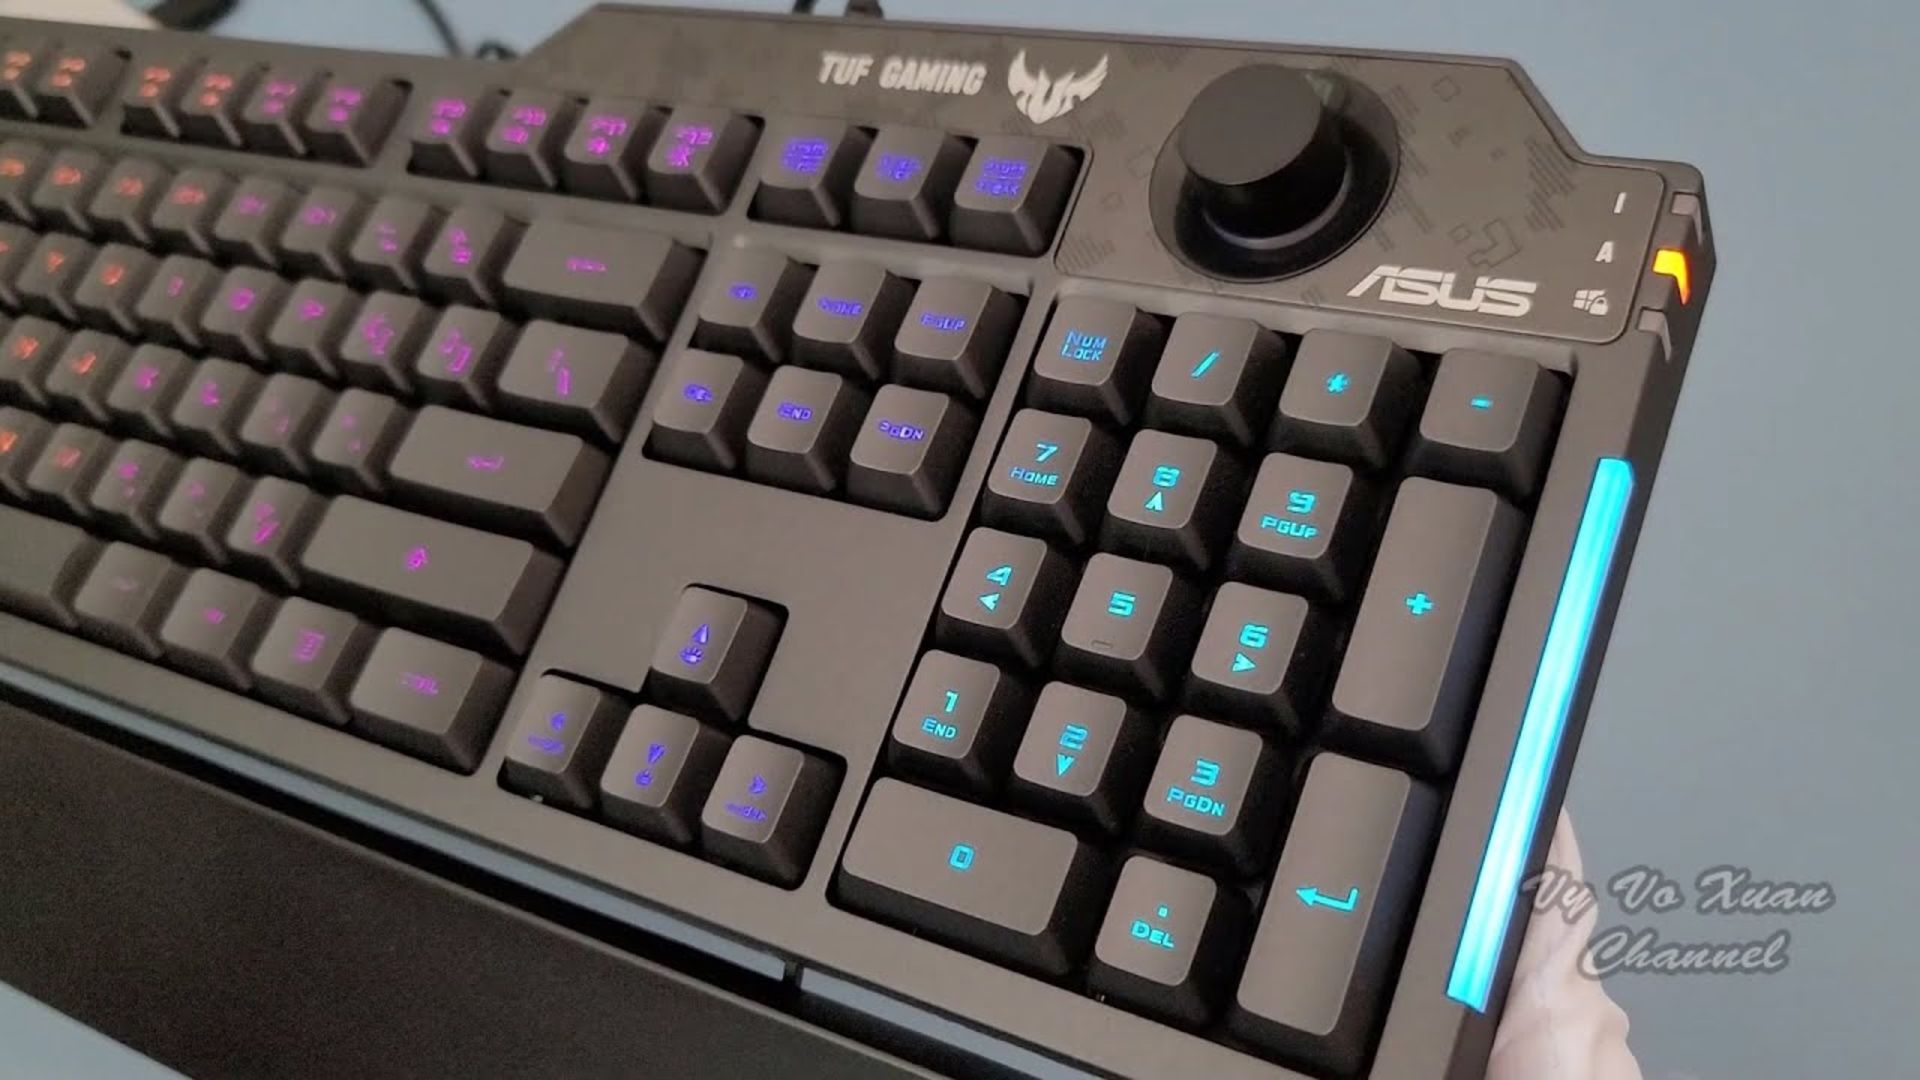 1 x Asus TUF K1 RGB Gaming Keyboard - Brand New and Boxed - Features Volume Control, Side Light - Image 4 of 8